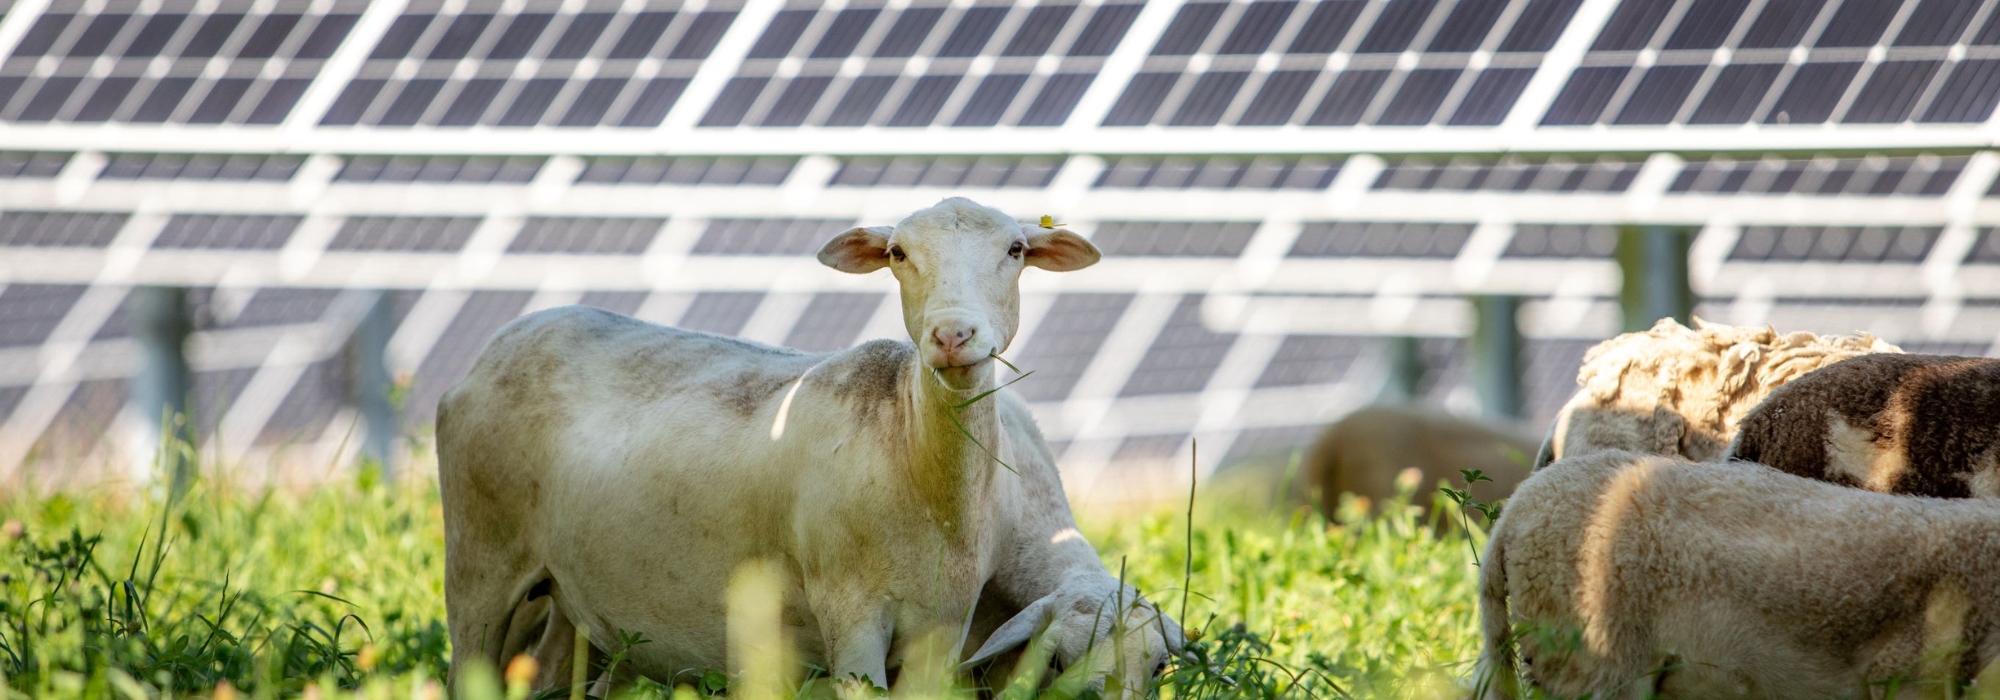 sheep with solar panels